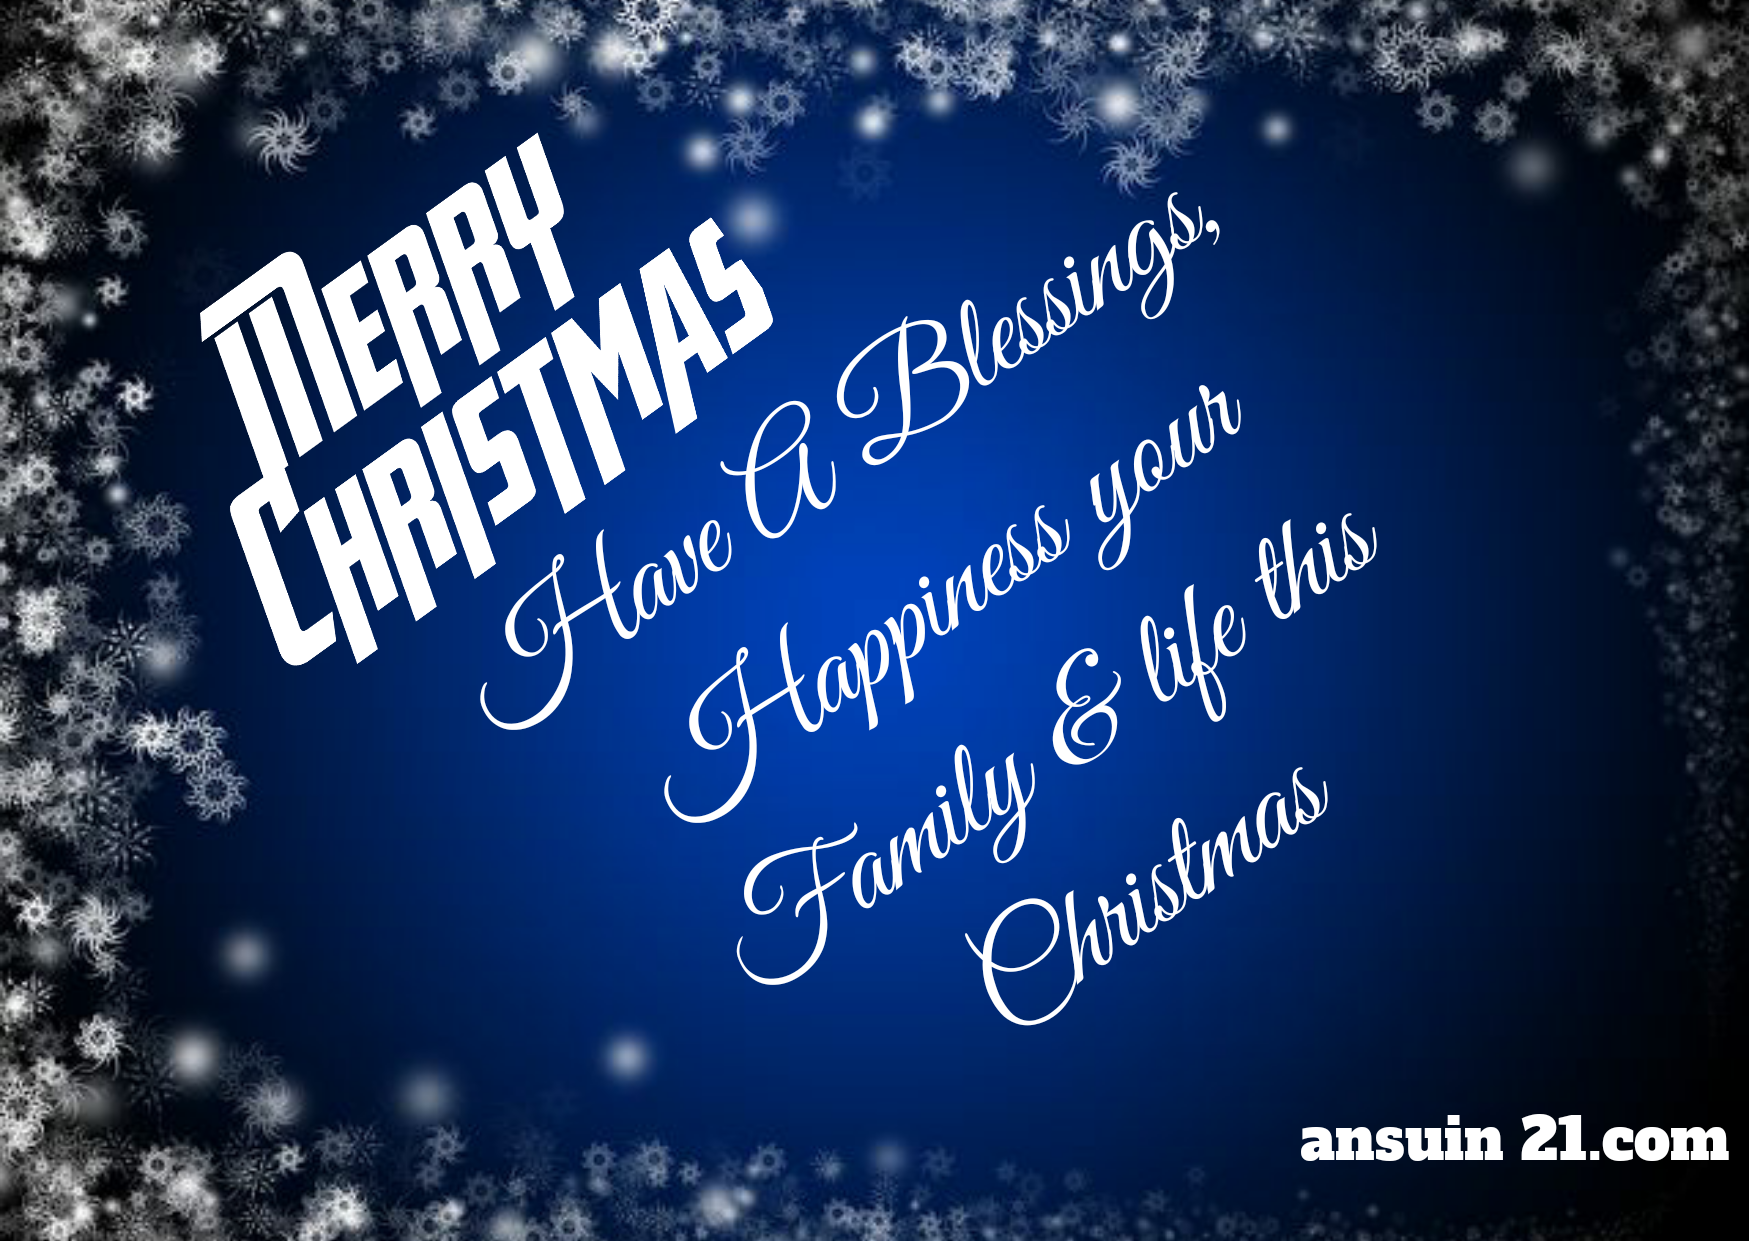 Merry Christmas Wishes, Images, Status, Quotes, HD Wallpaper